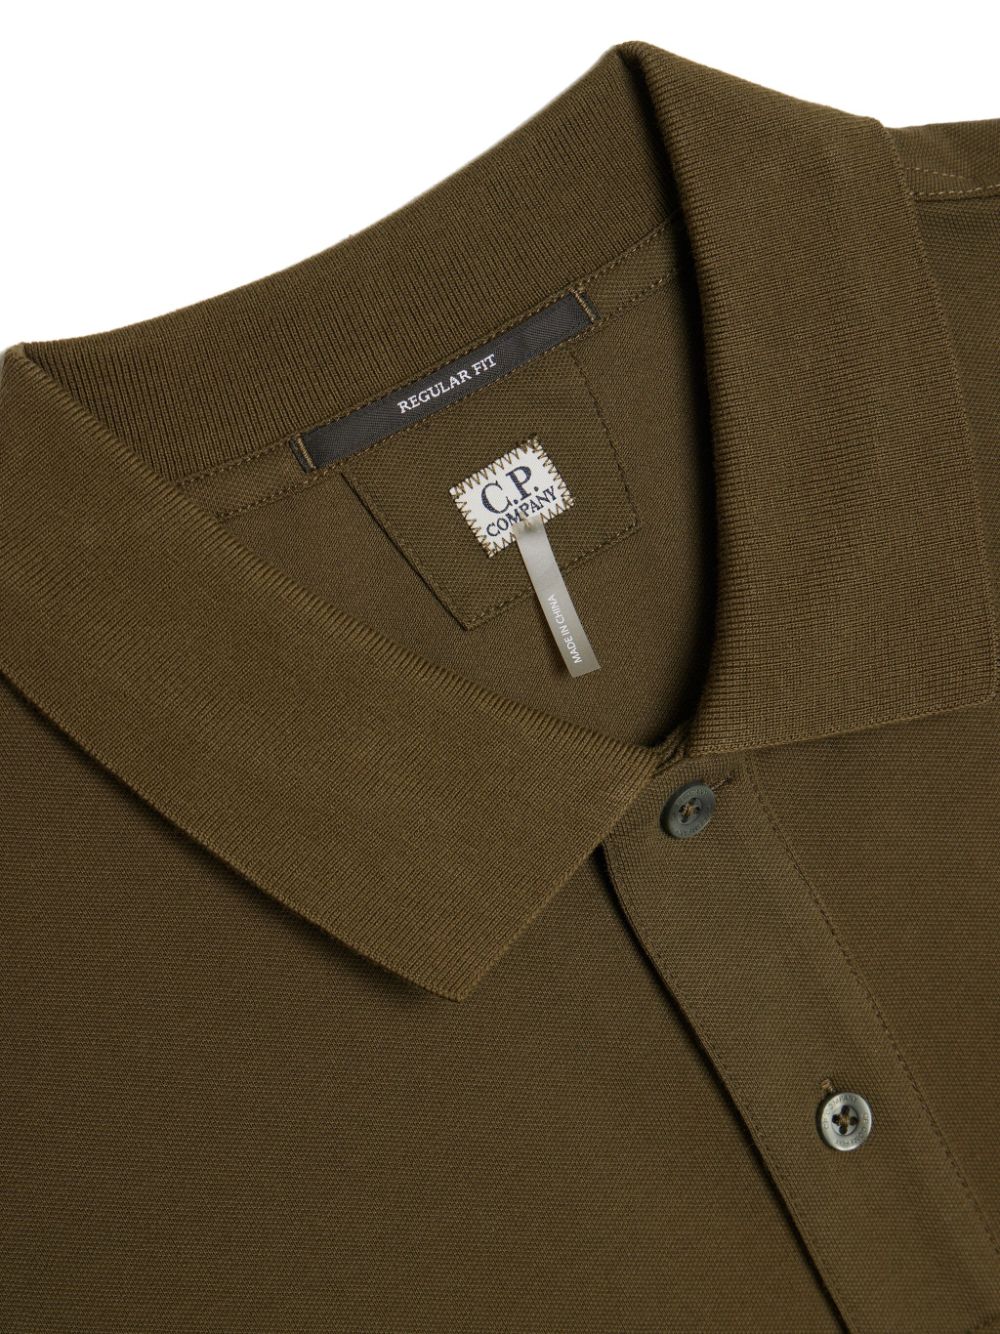 Olive green polo shirt